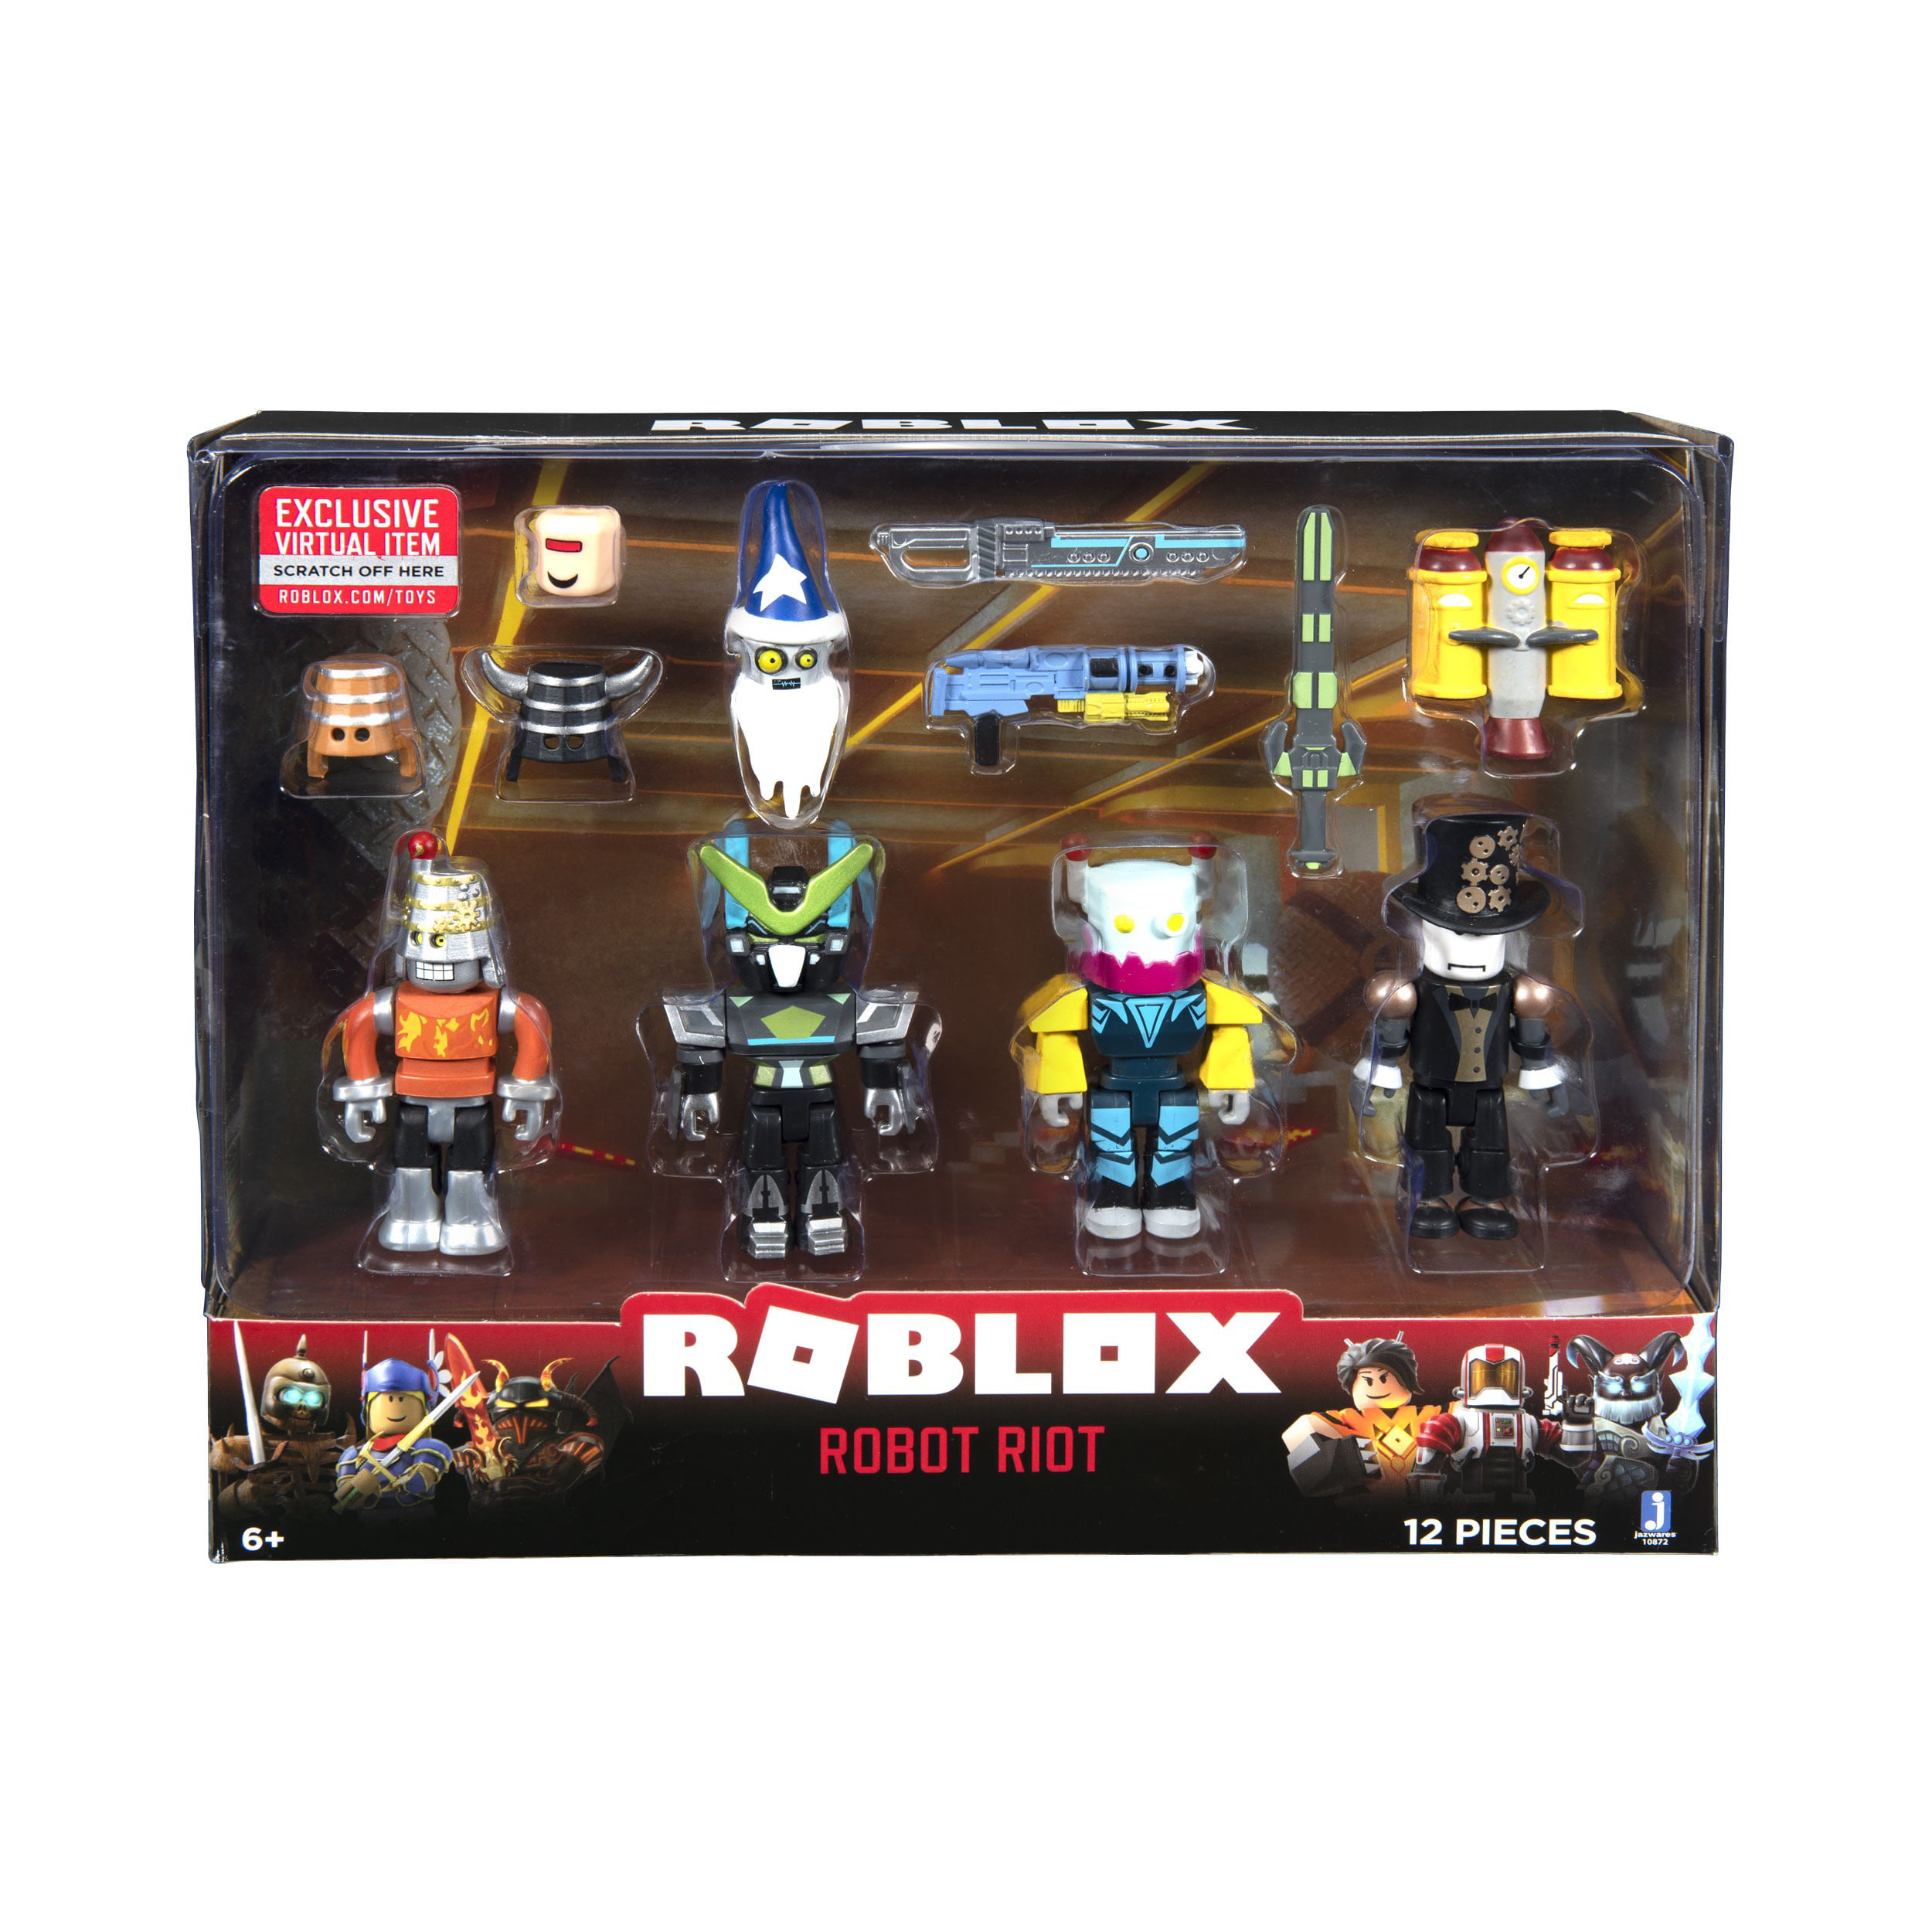 Roblox Action Collection Robot Riot Four Figure Pack Includes Exclusive Virtual Item Walmart Com Walmart Com - details about roblox mix and match days of knight 4 figure pack pretend game play kid toy fun